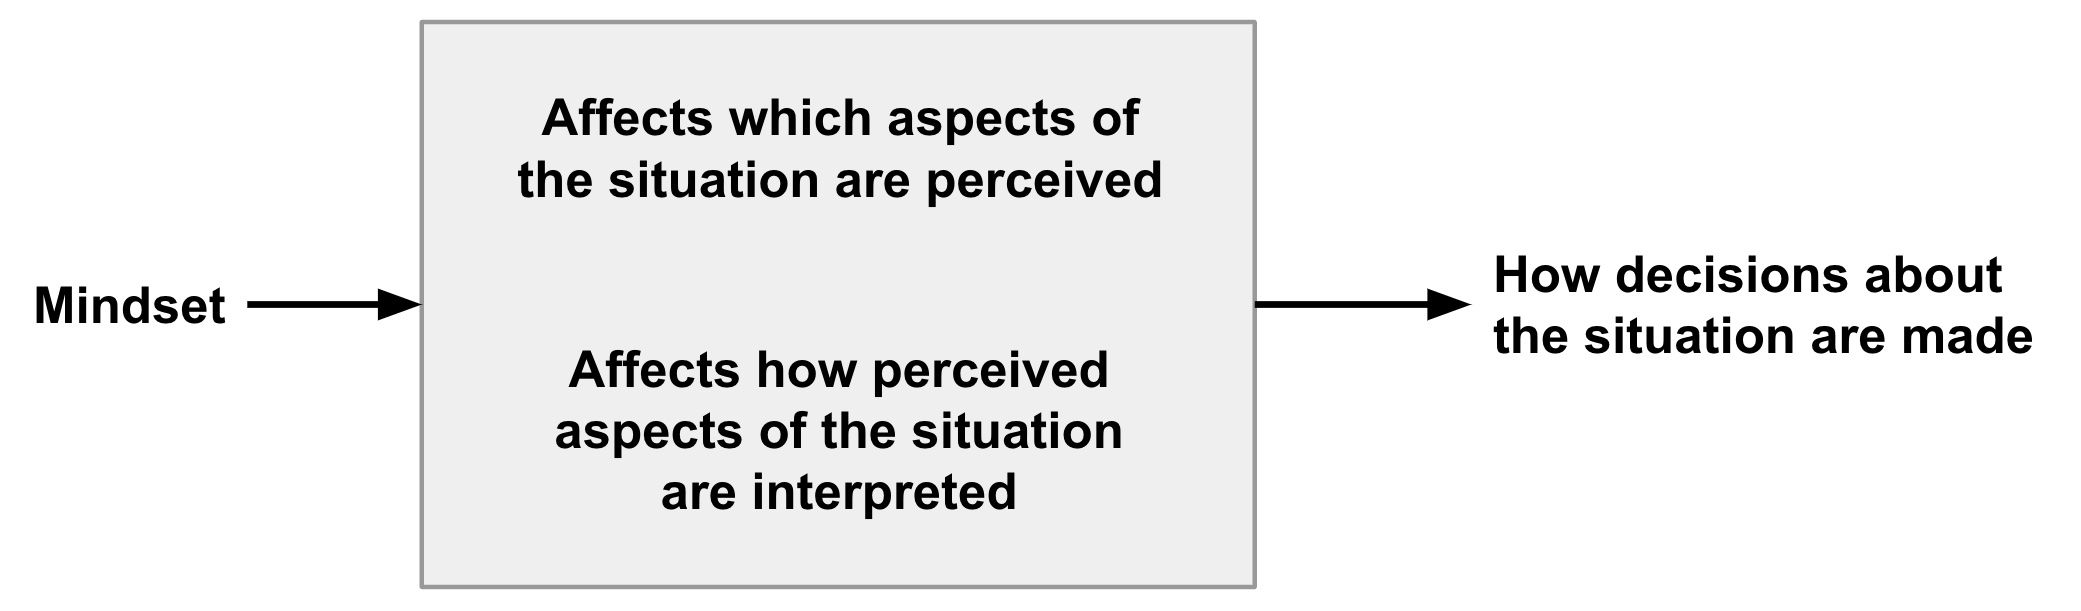 How mindset shapes perception, interpretation, and decisionmaking about a situation